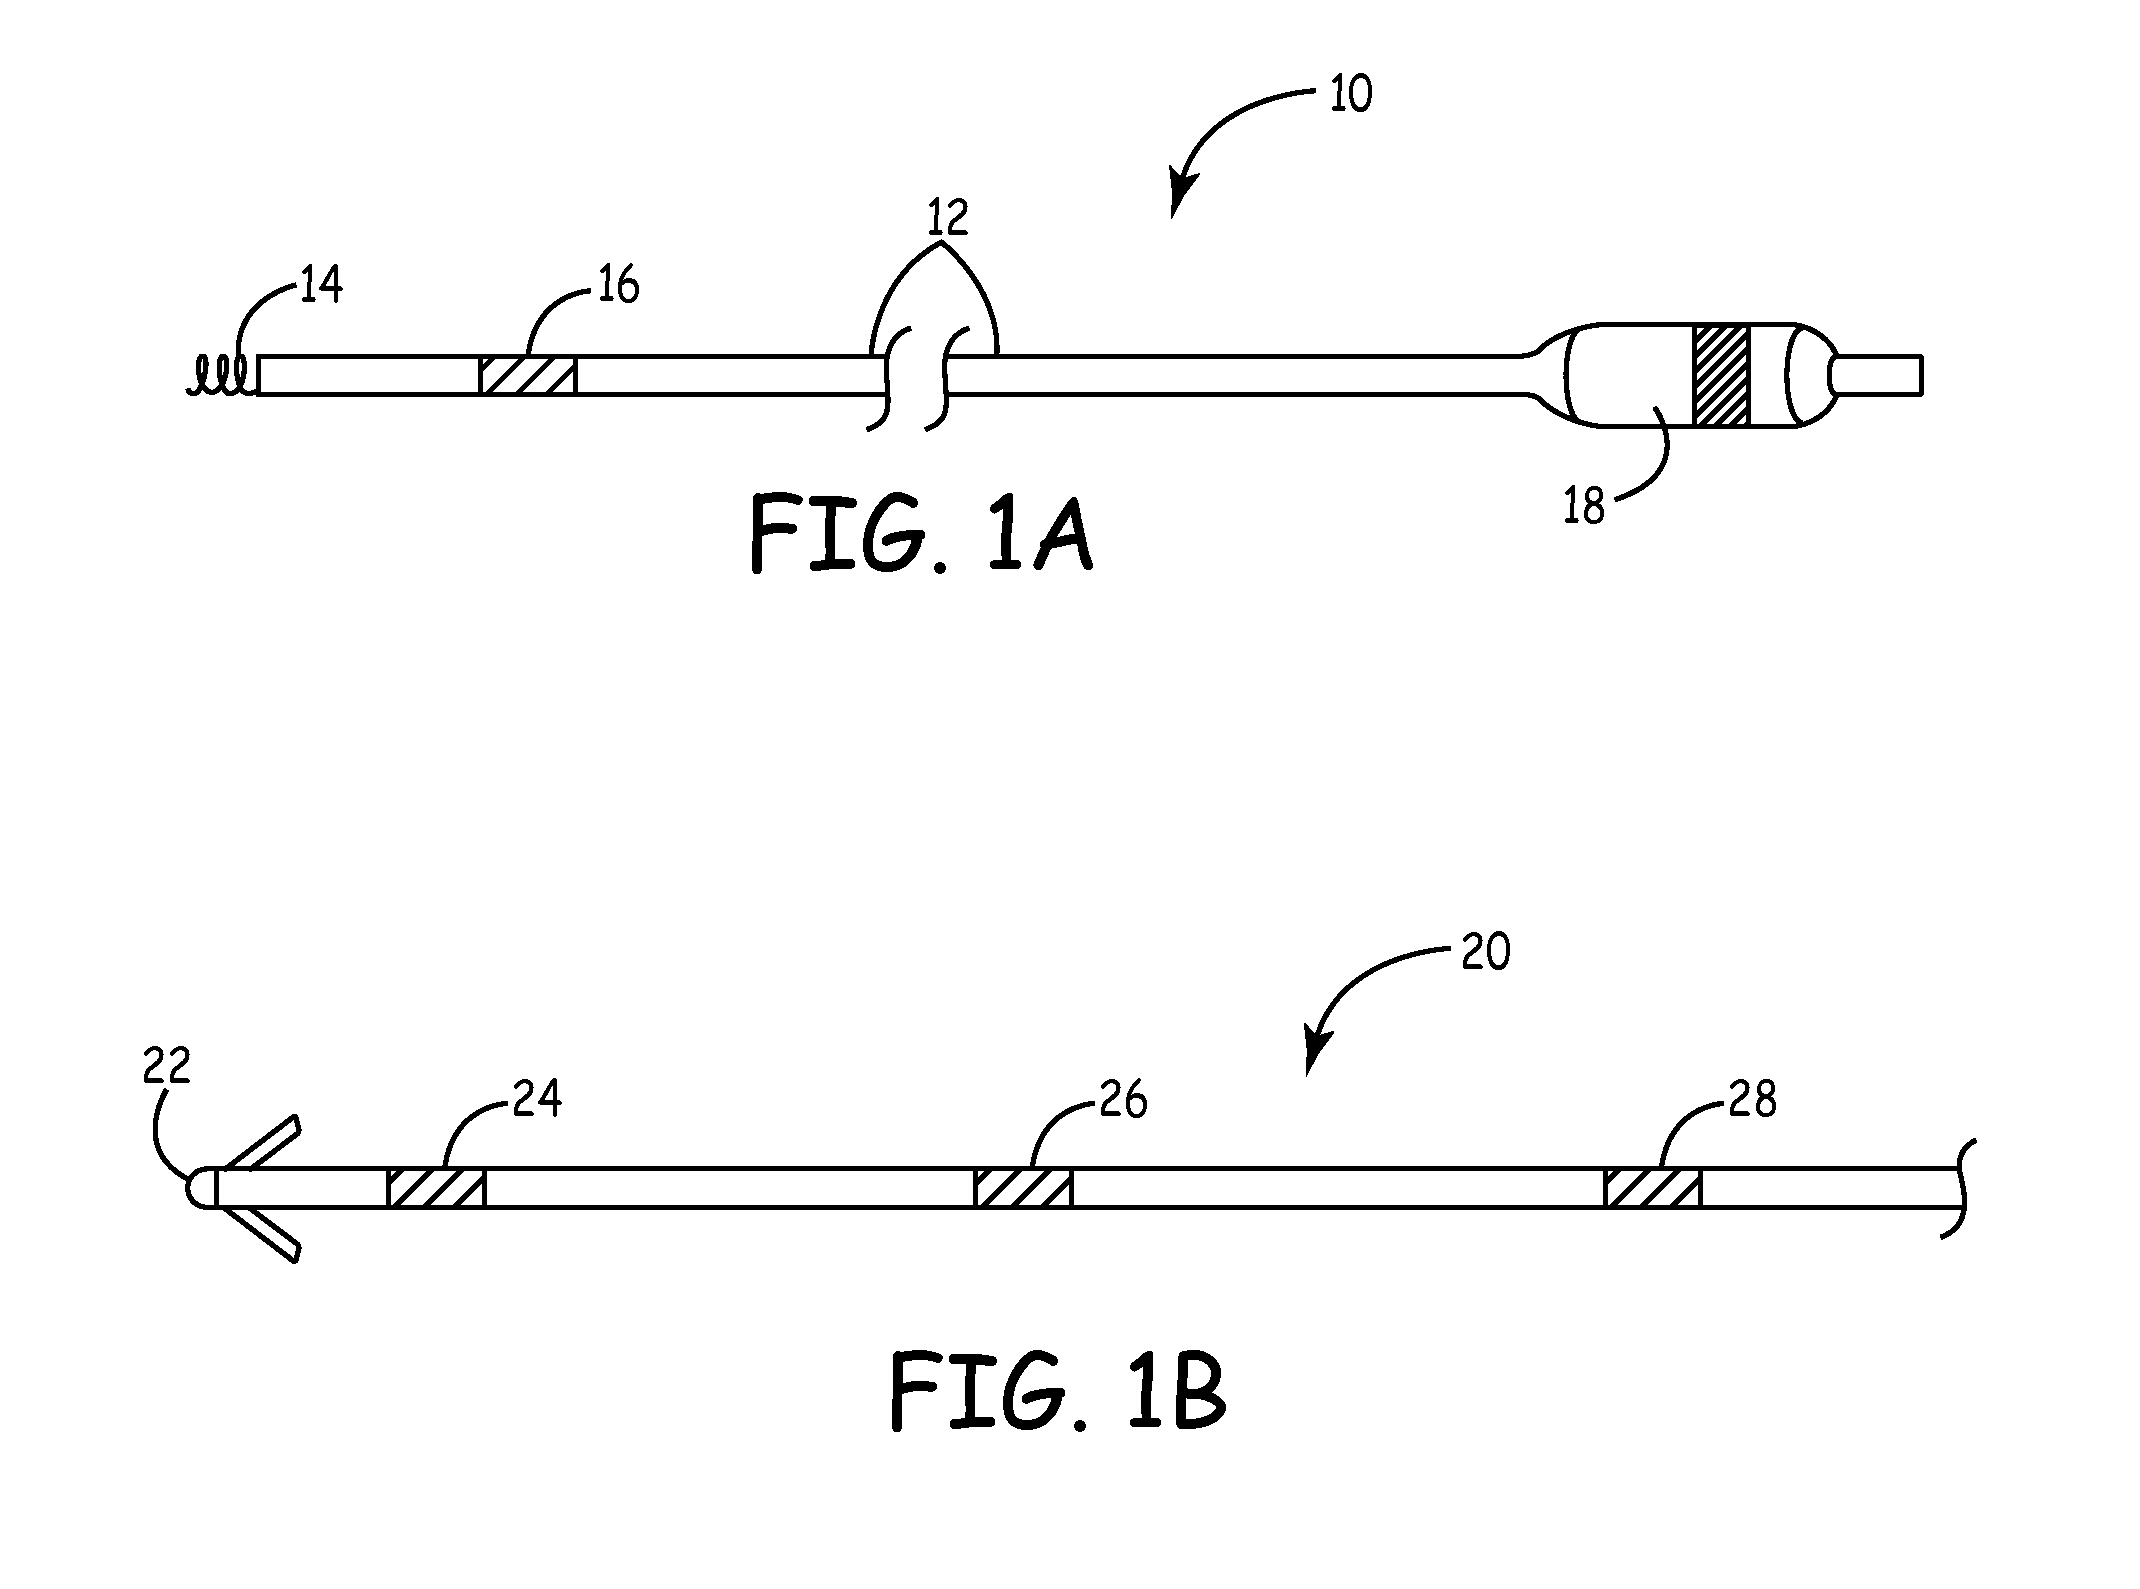 Medical Devices Incorporating Carbon Nanotube Material and Methods of Fabricating Same